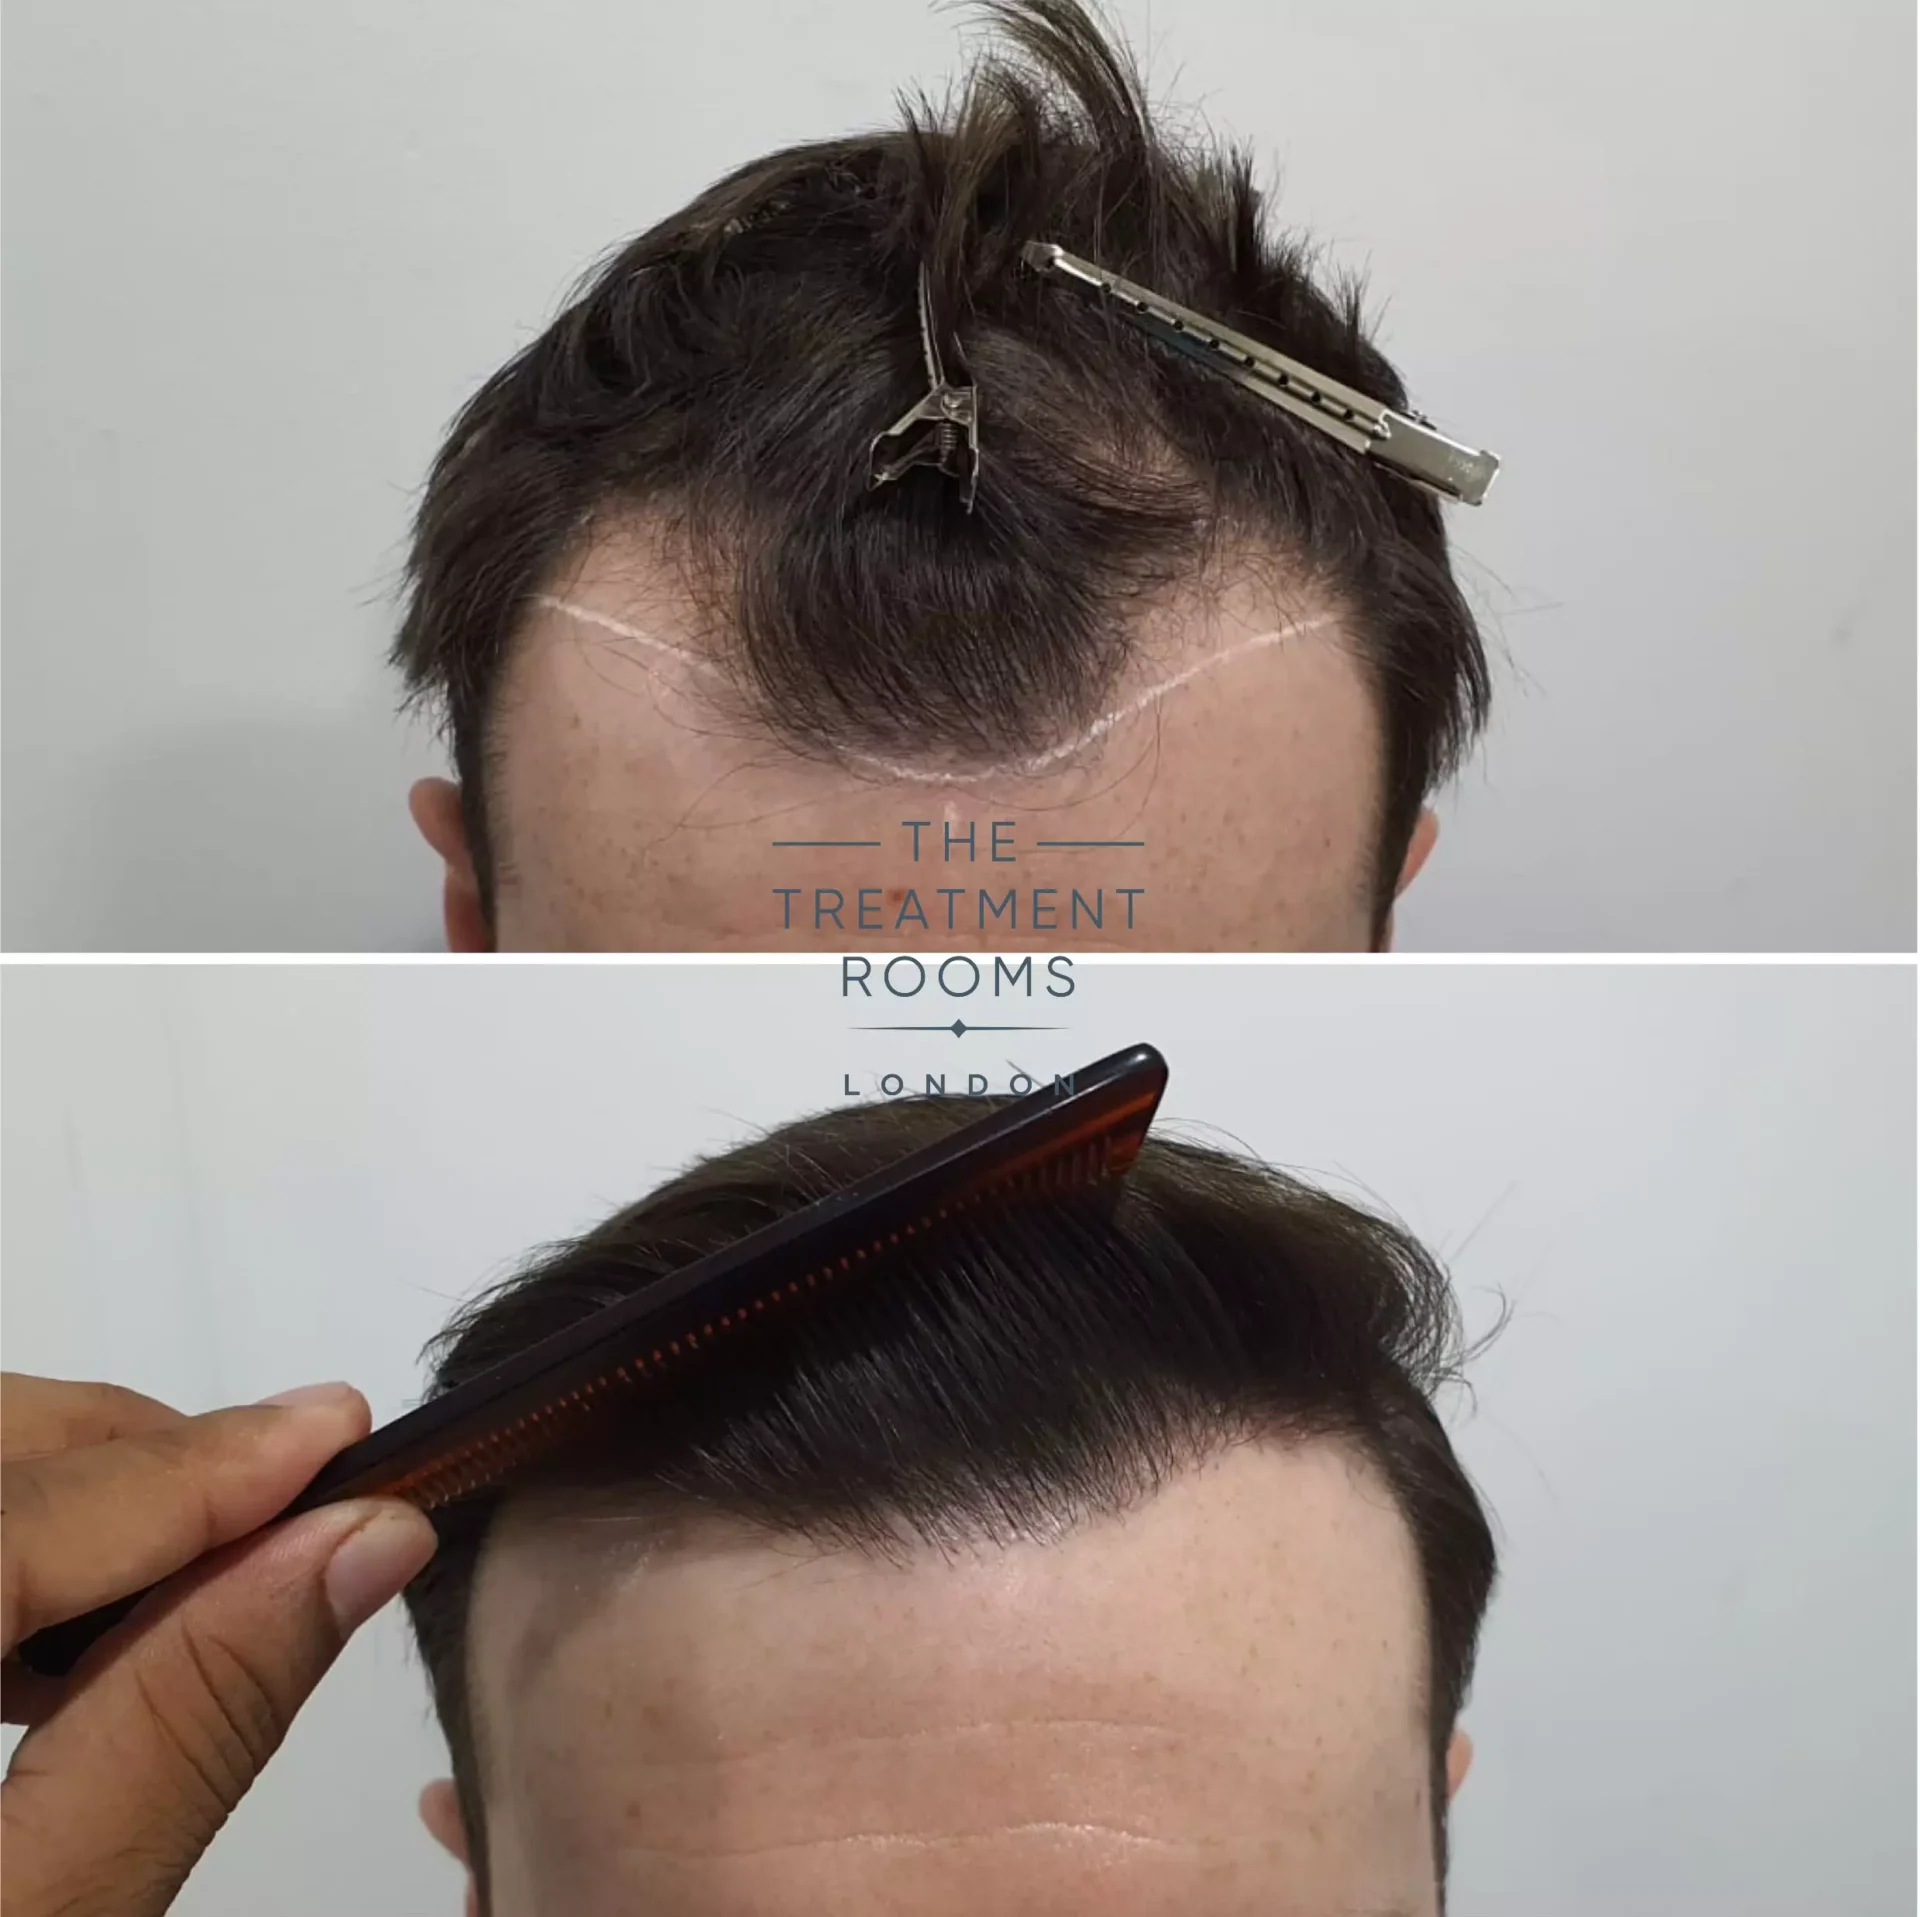 temple hair transplant before and after 1014 grafts